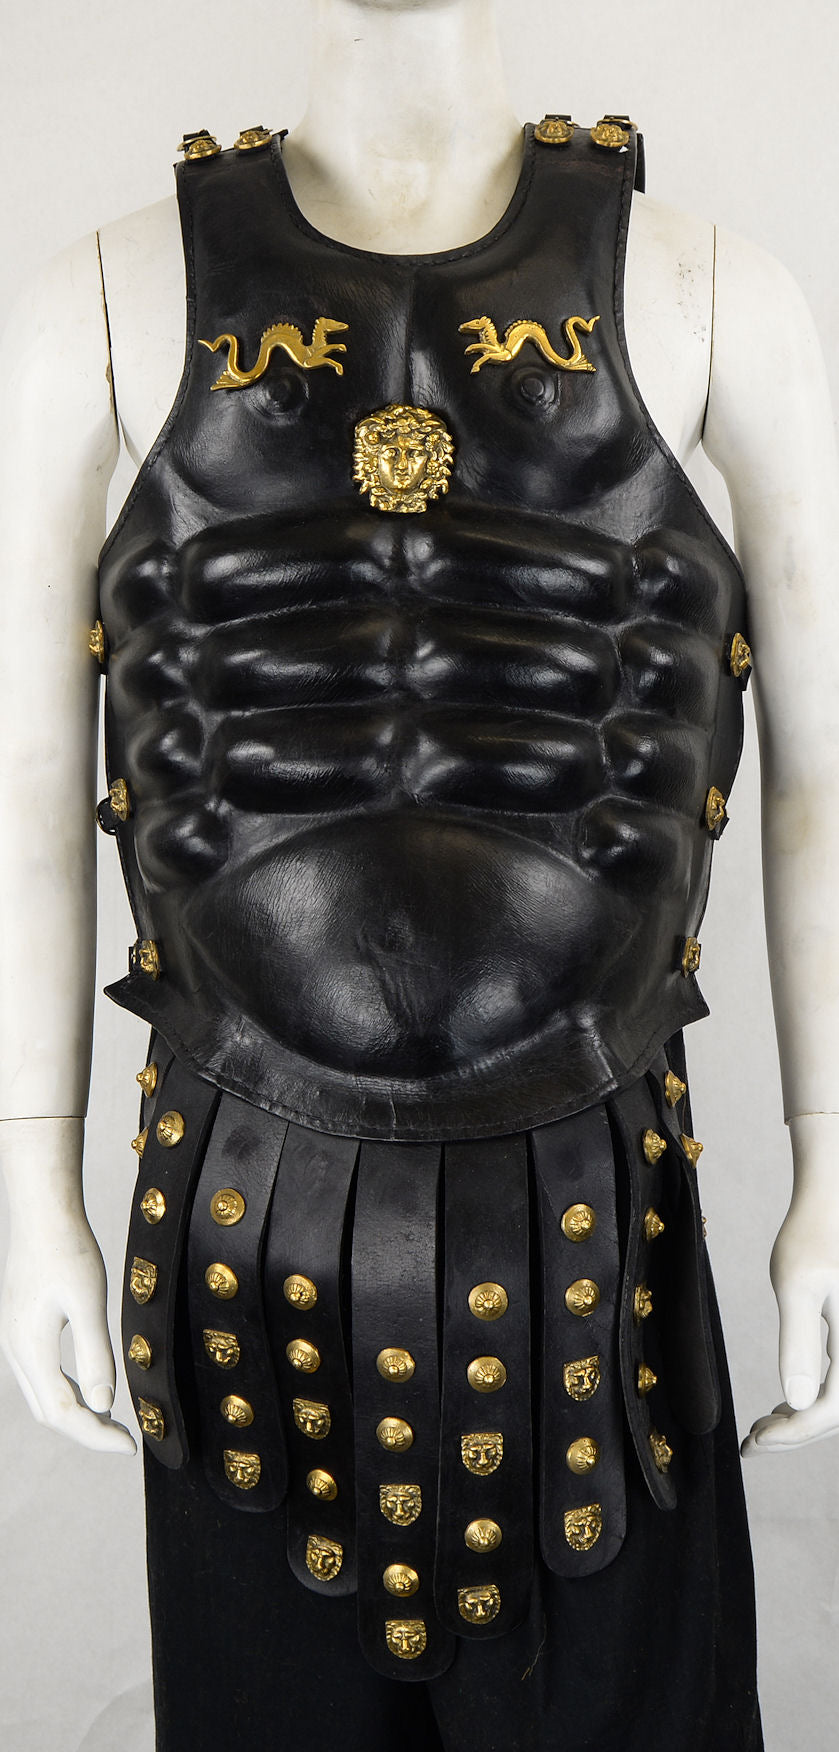 Leather Muscle Armor with Studded Tassets